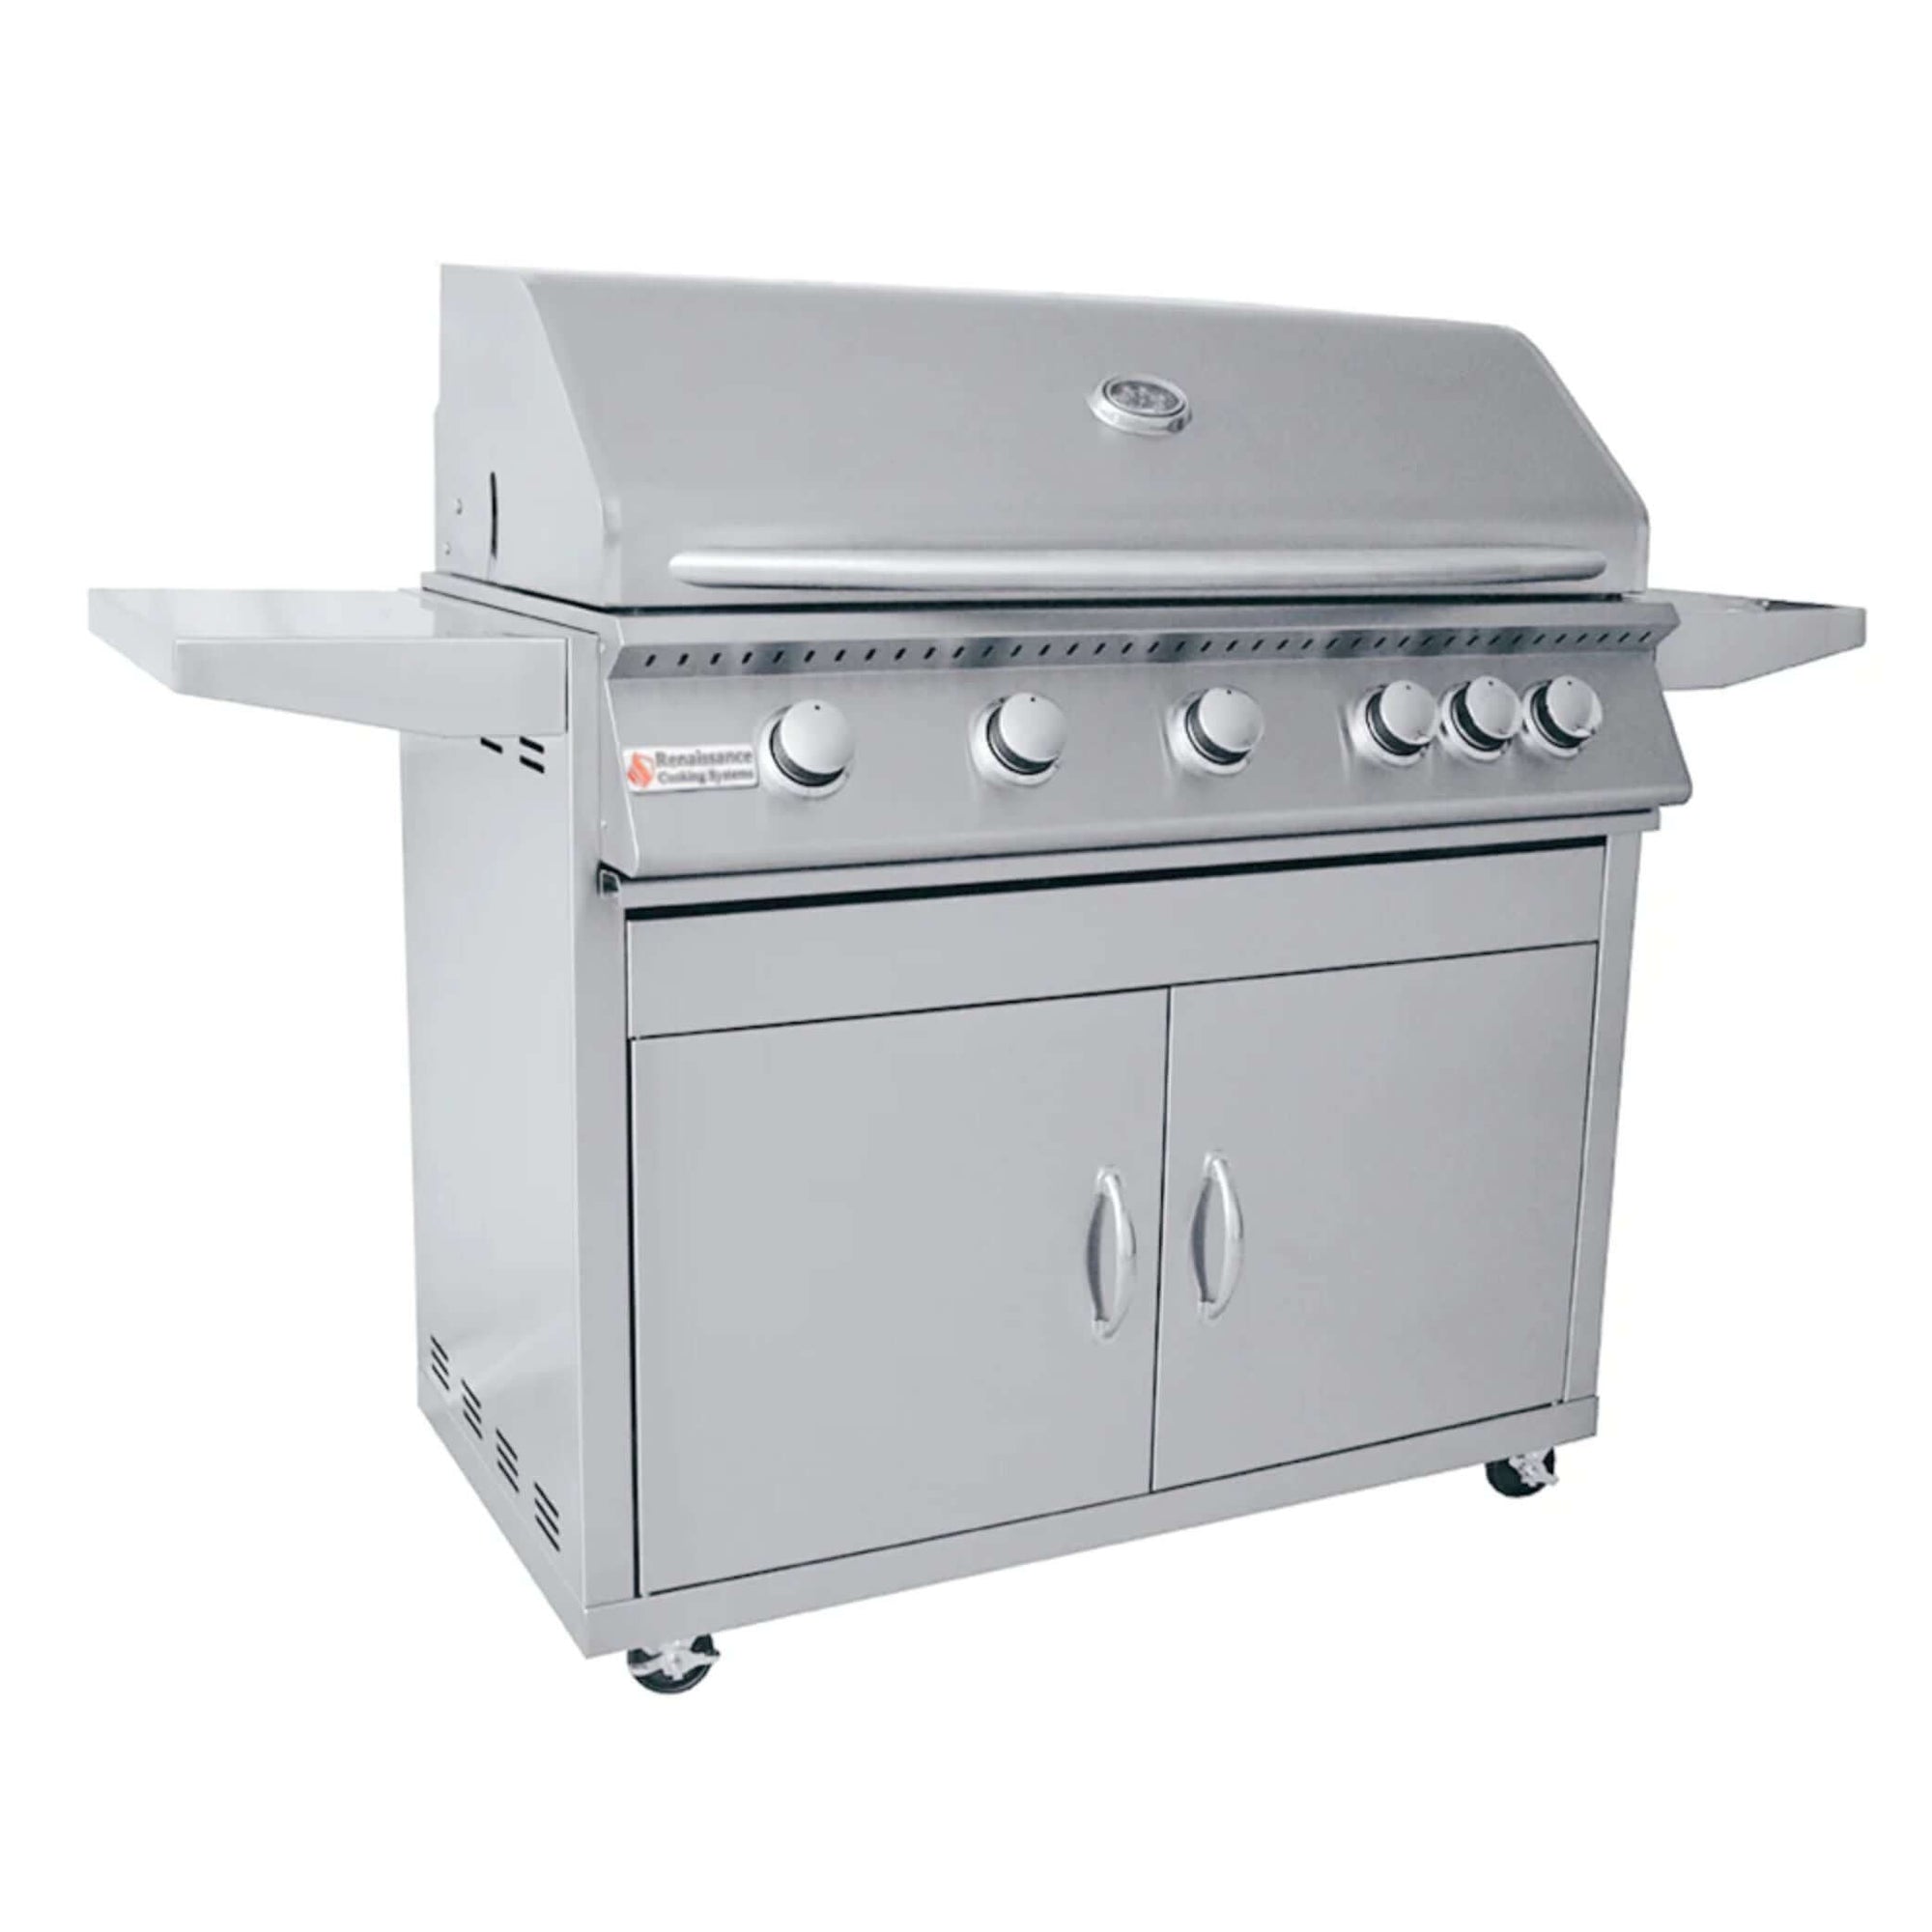 Renaissance Cooking Systems 40" Premier Freestanding Grill-Natural Gas